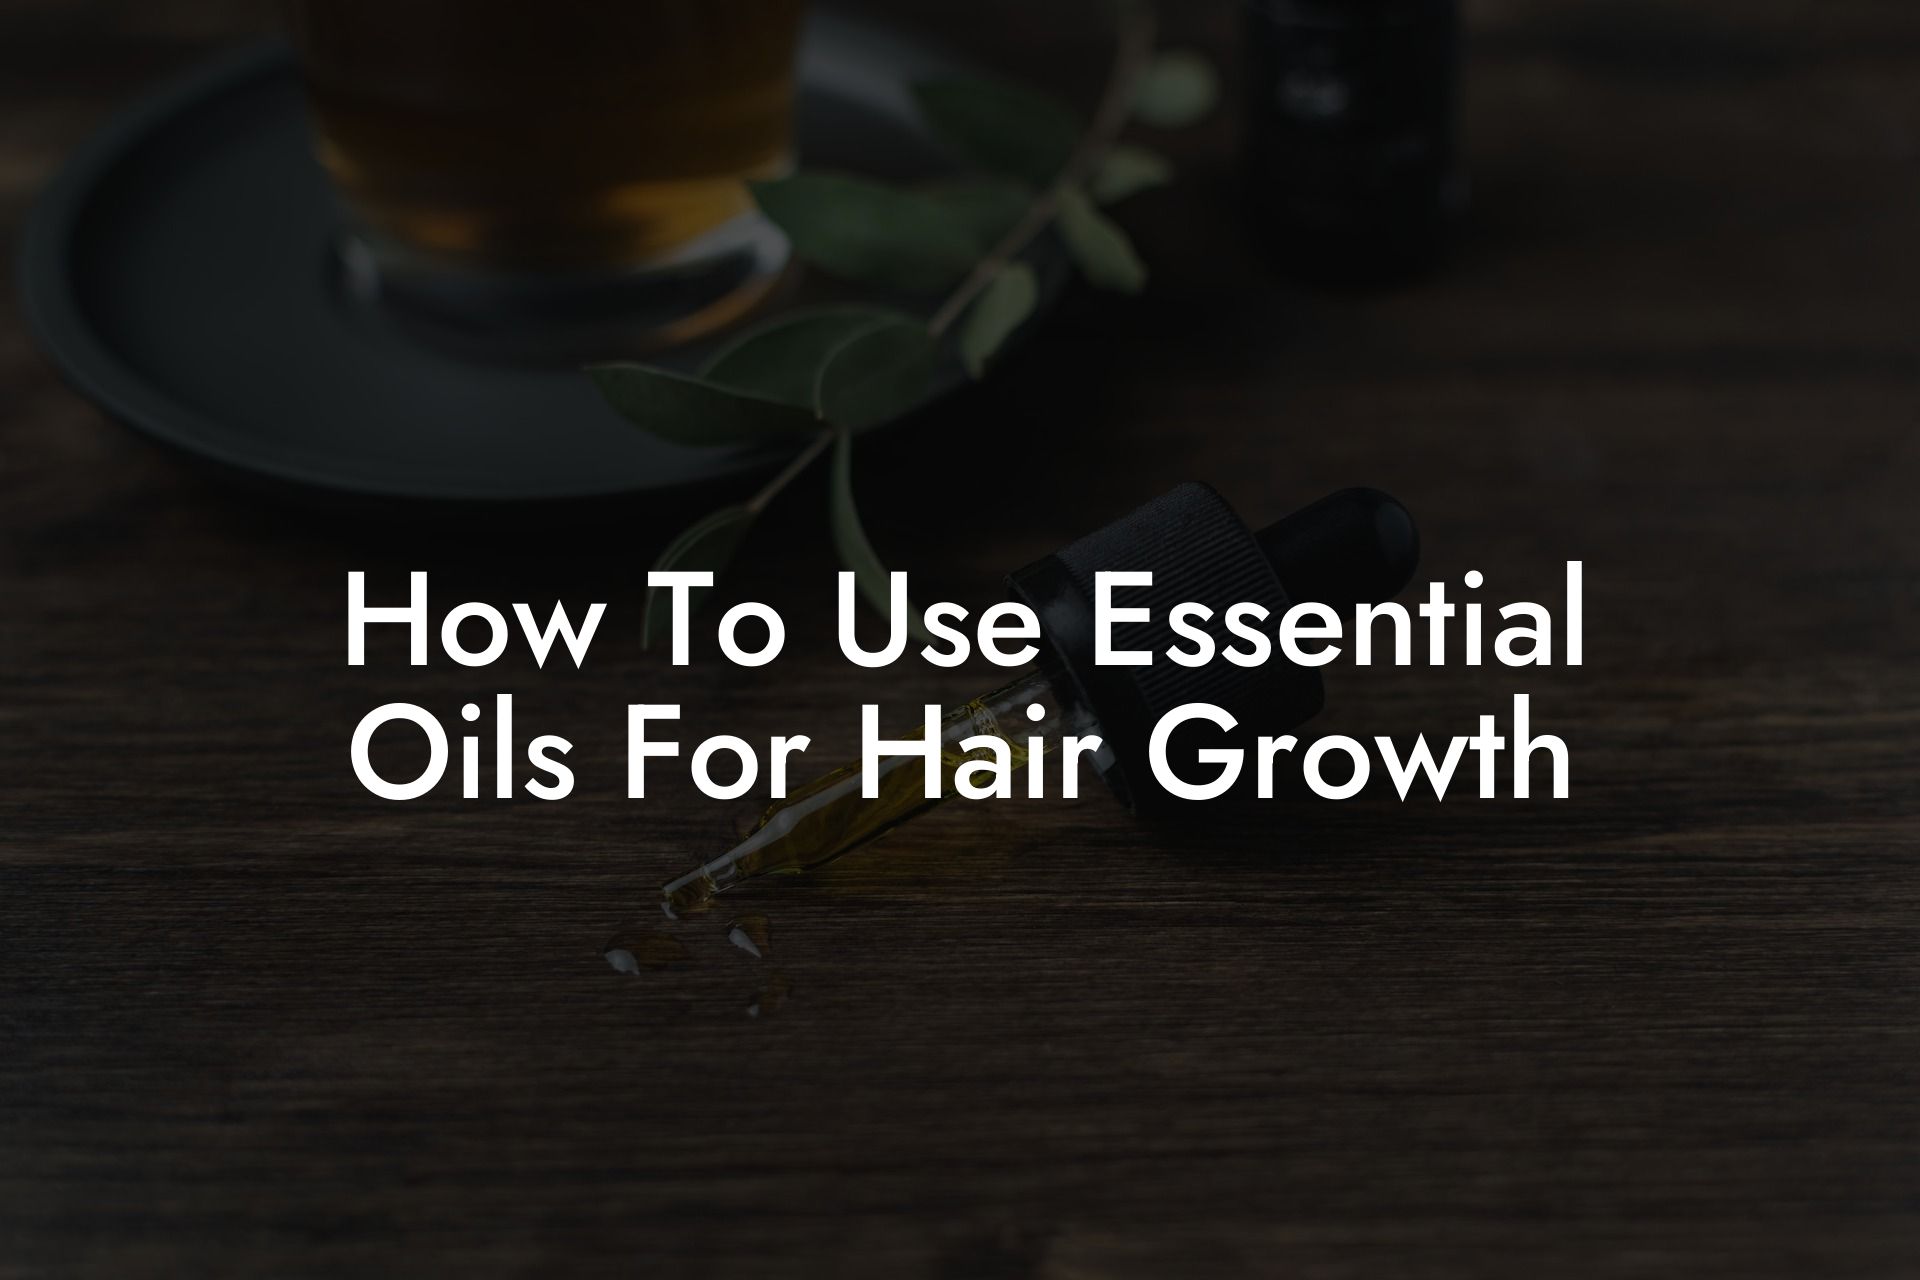 How To Use Essential Oils For Hair Growth